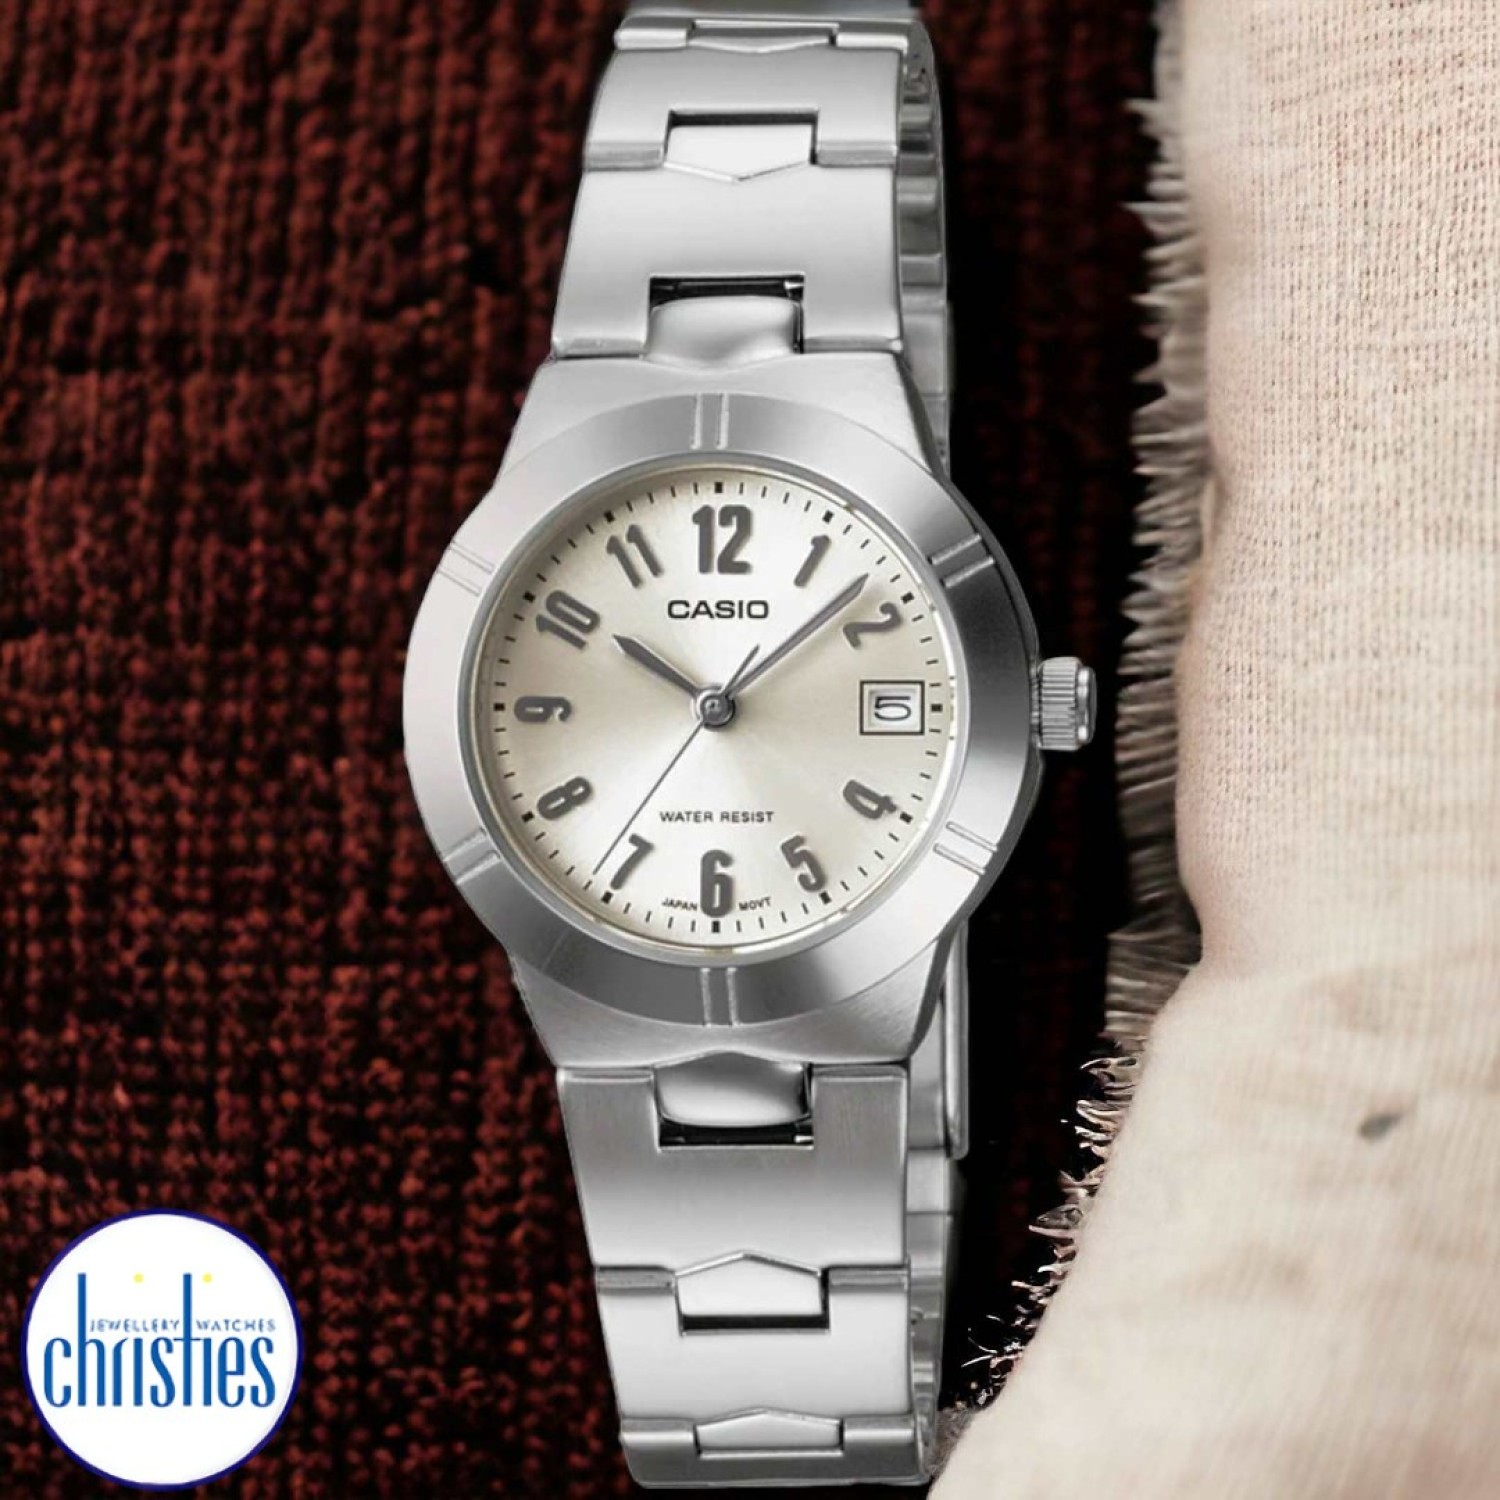 LTP1241D-7A  Casio. The LTP-1241 models feature bright pastel colours for the face and a date indicator. This watch has a solid construction with a Stainless Steel  Bracelet and is water resistant. 3 Months No Payments and Interes @christies.online